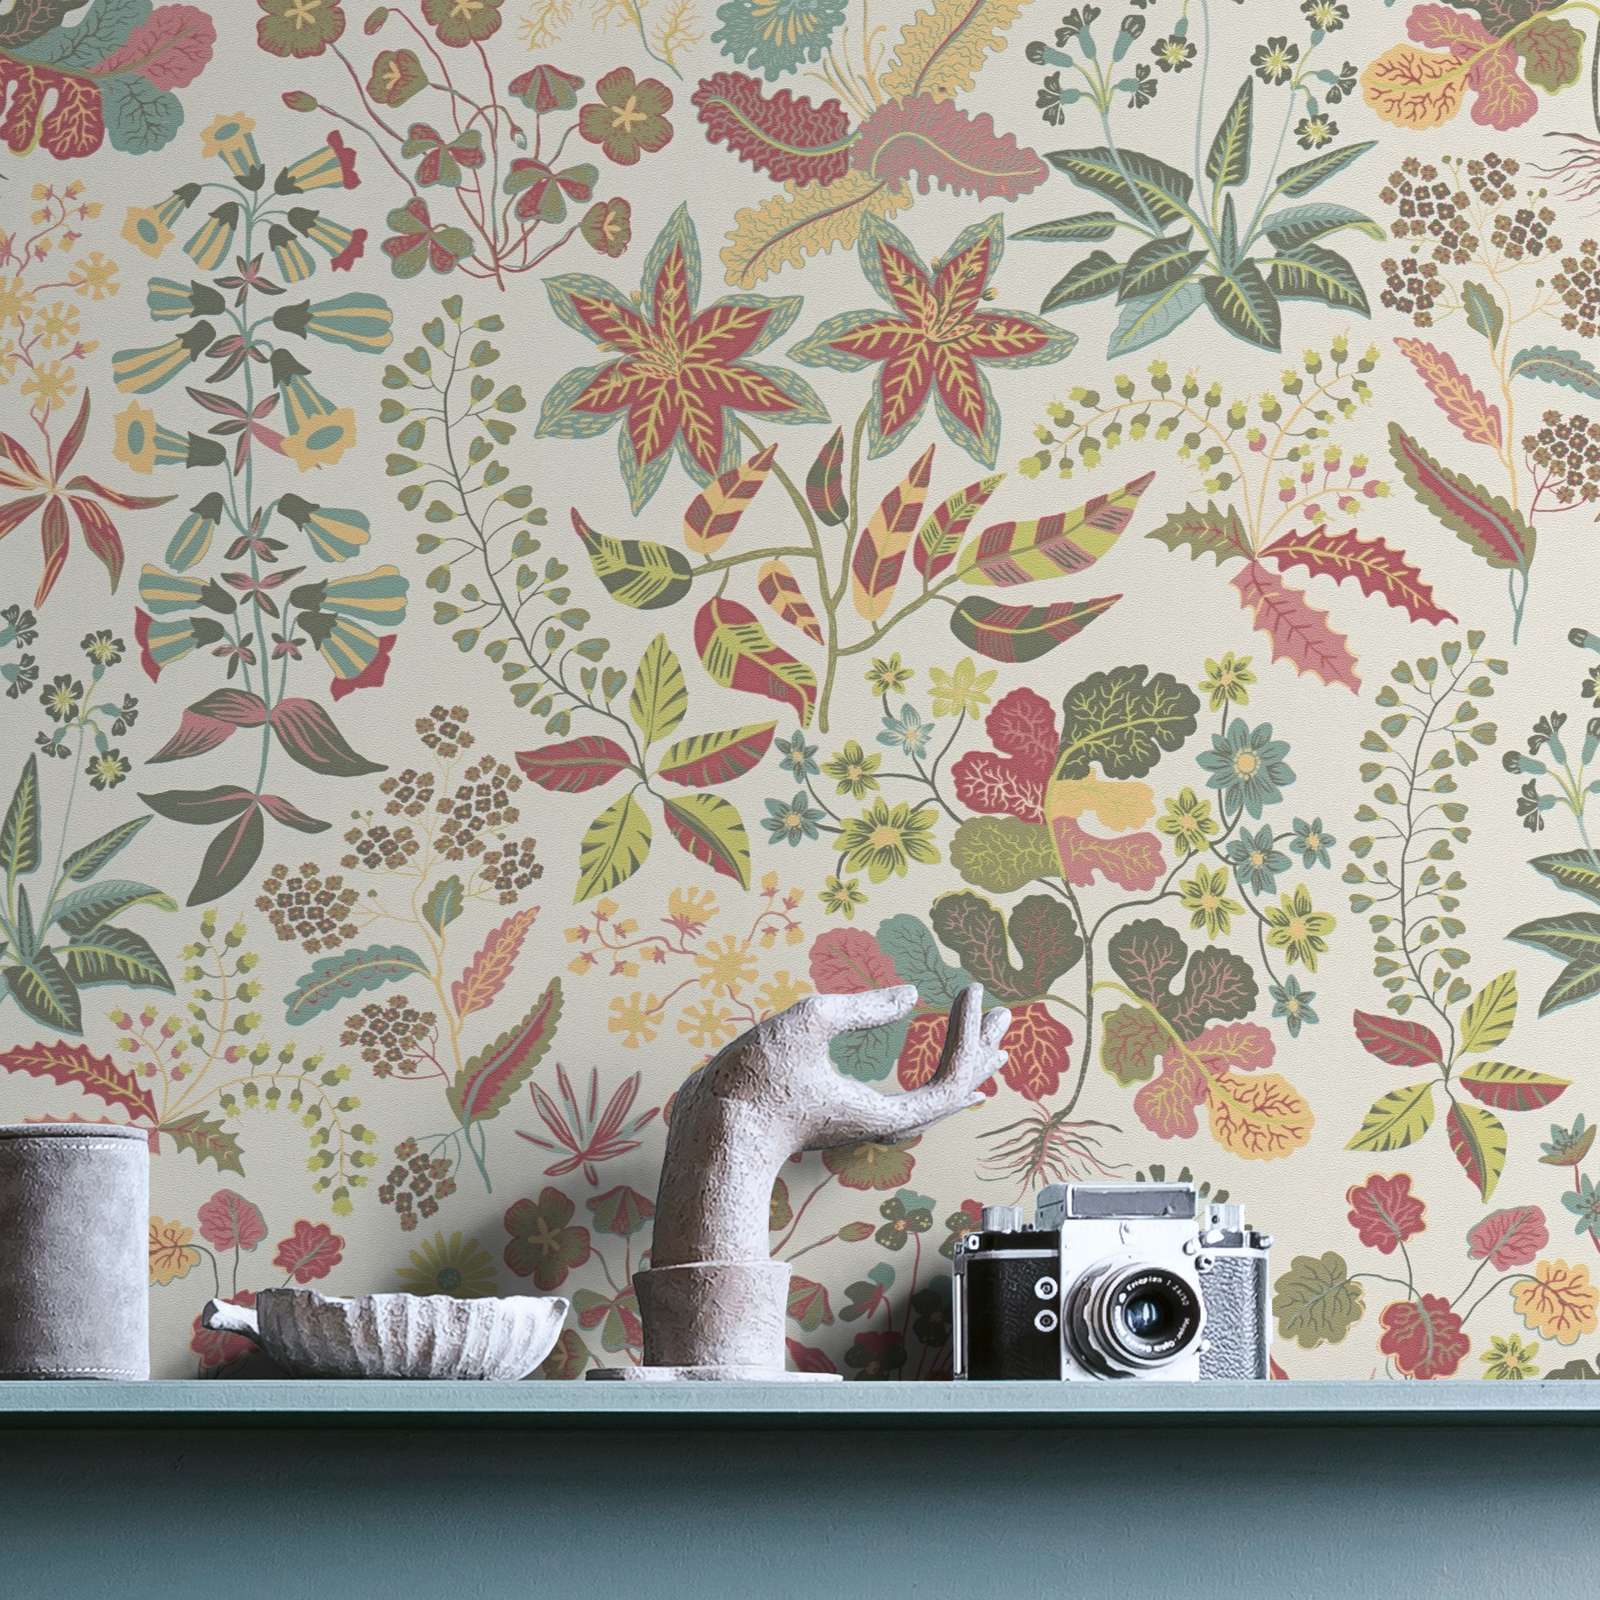             Floral wallpaper with detailed pattern - red, green, cream
        